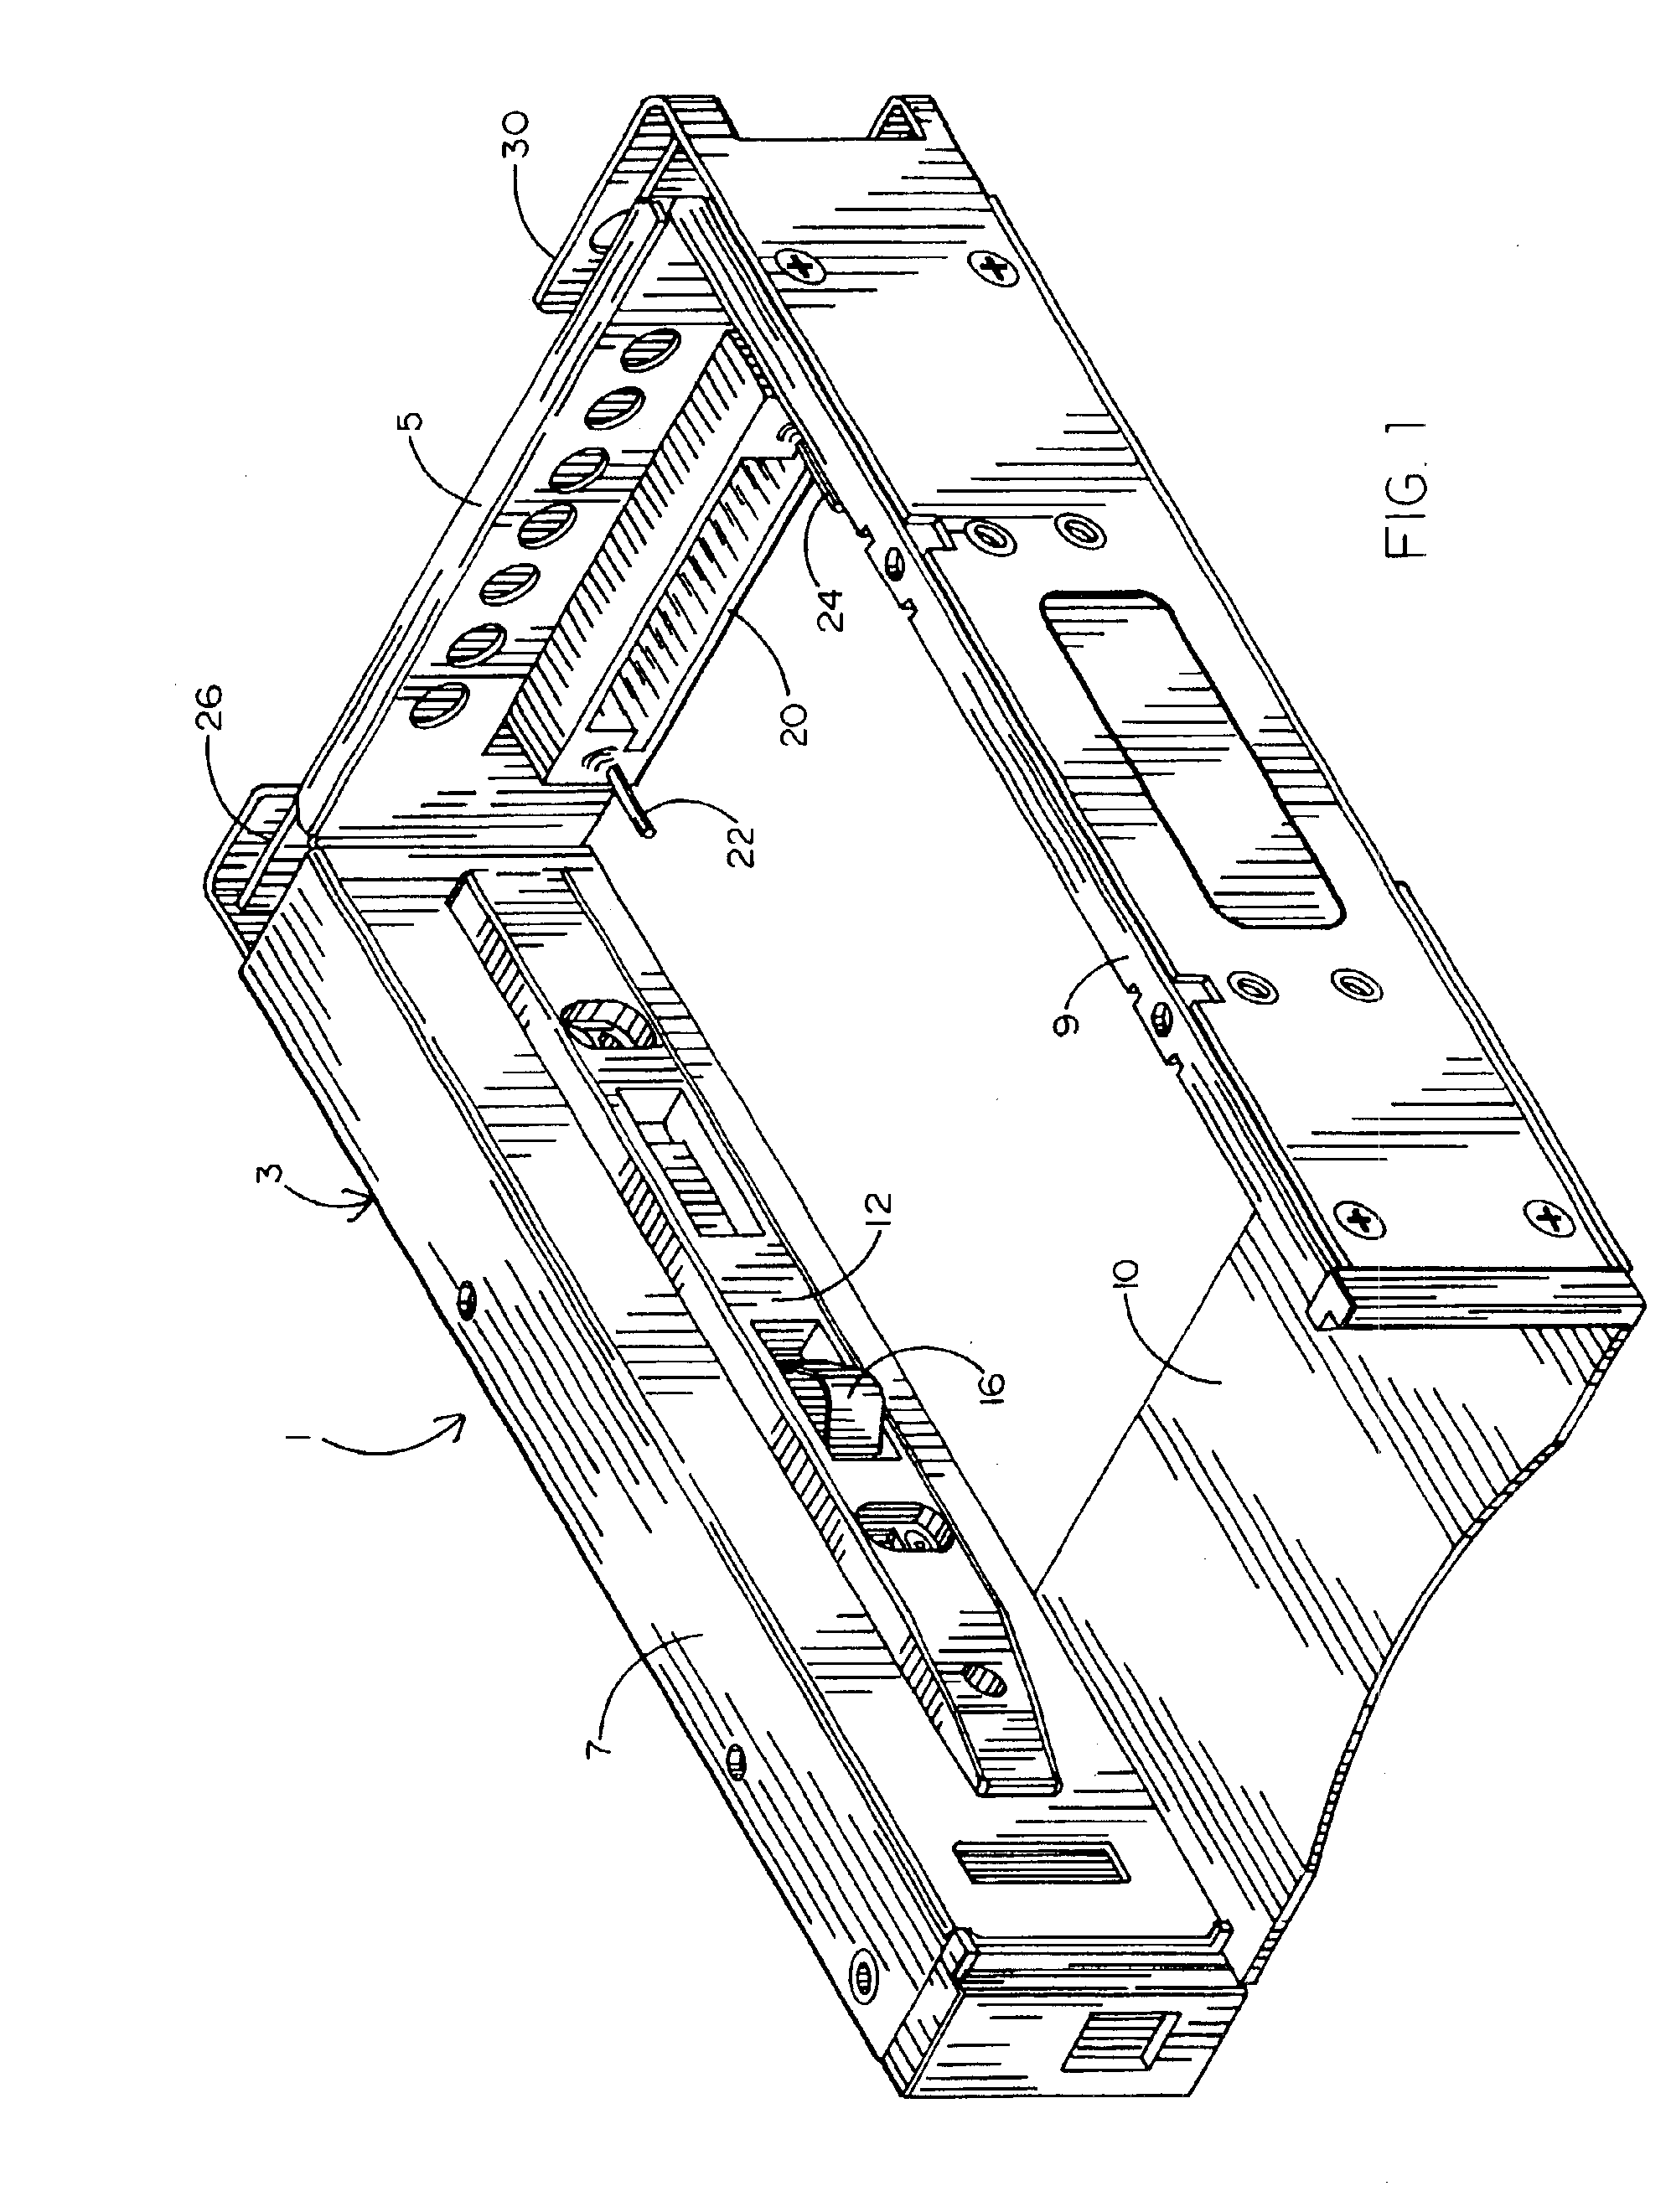 Universal receptacles for interchangeably receiving different removable computer drive carriers